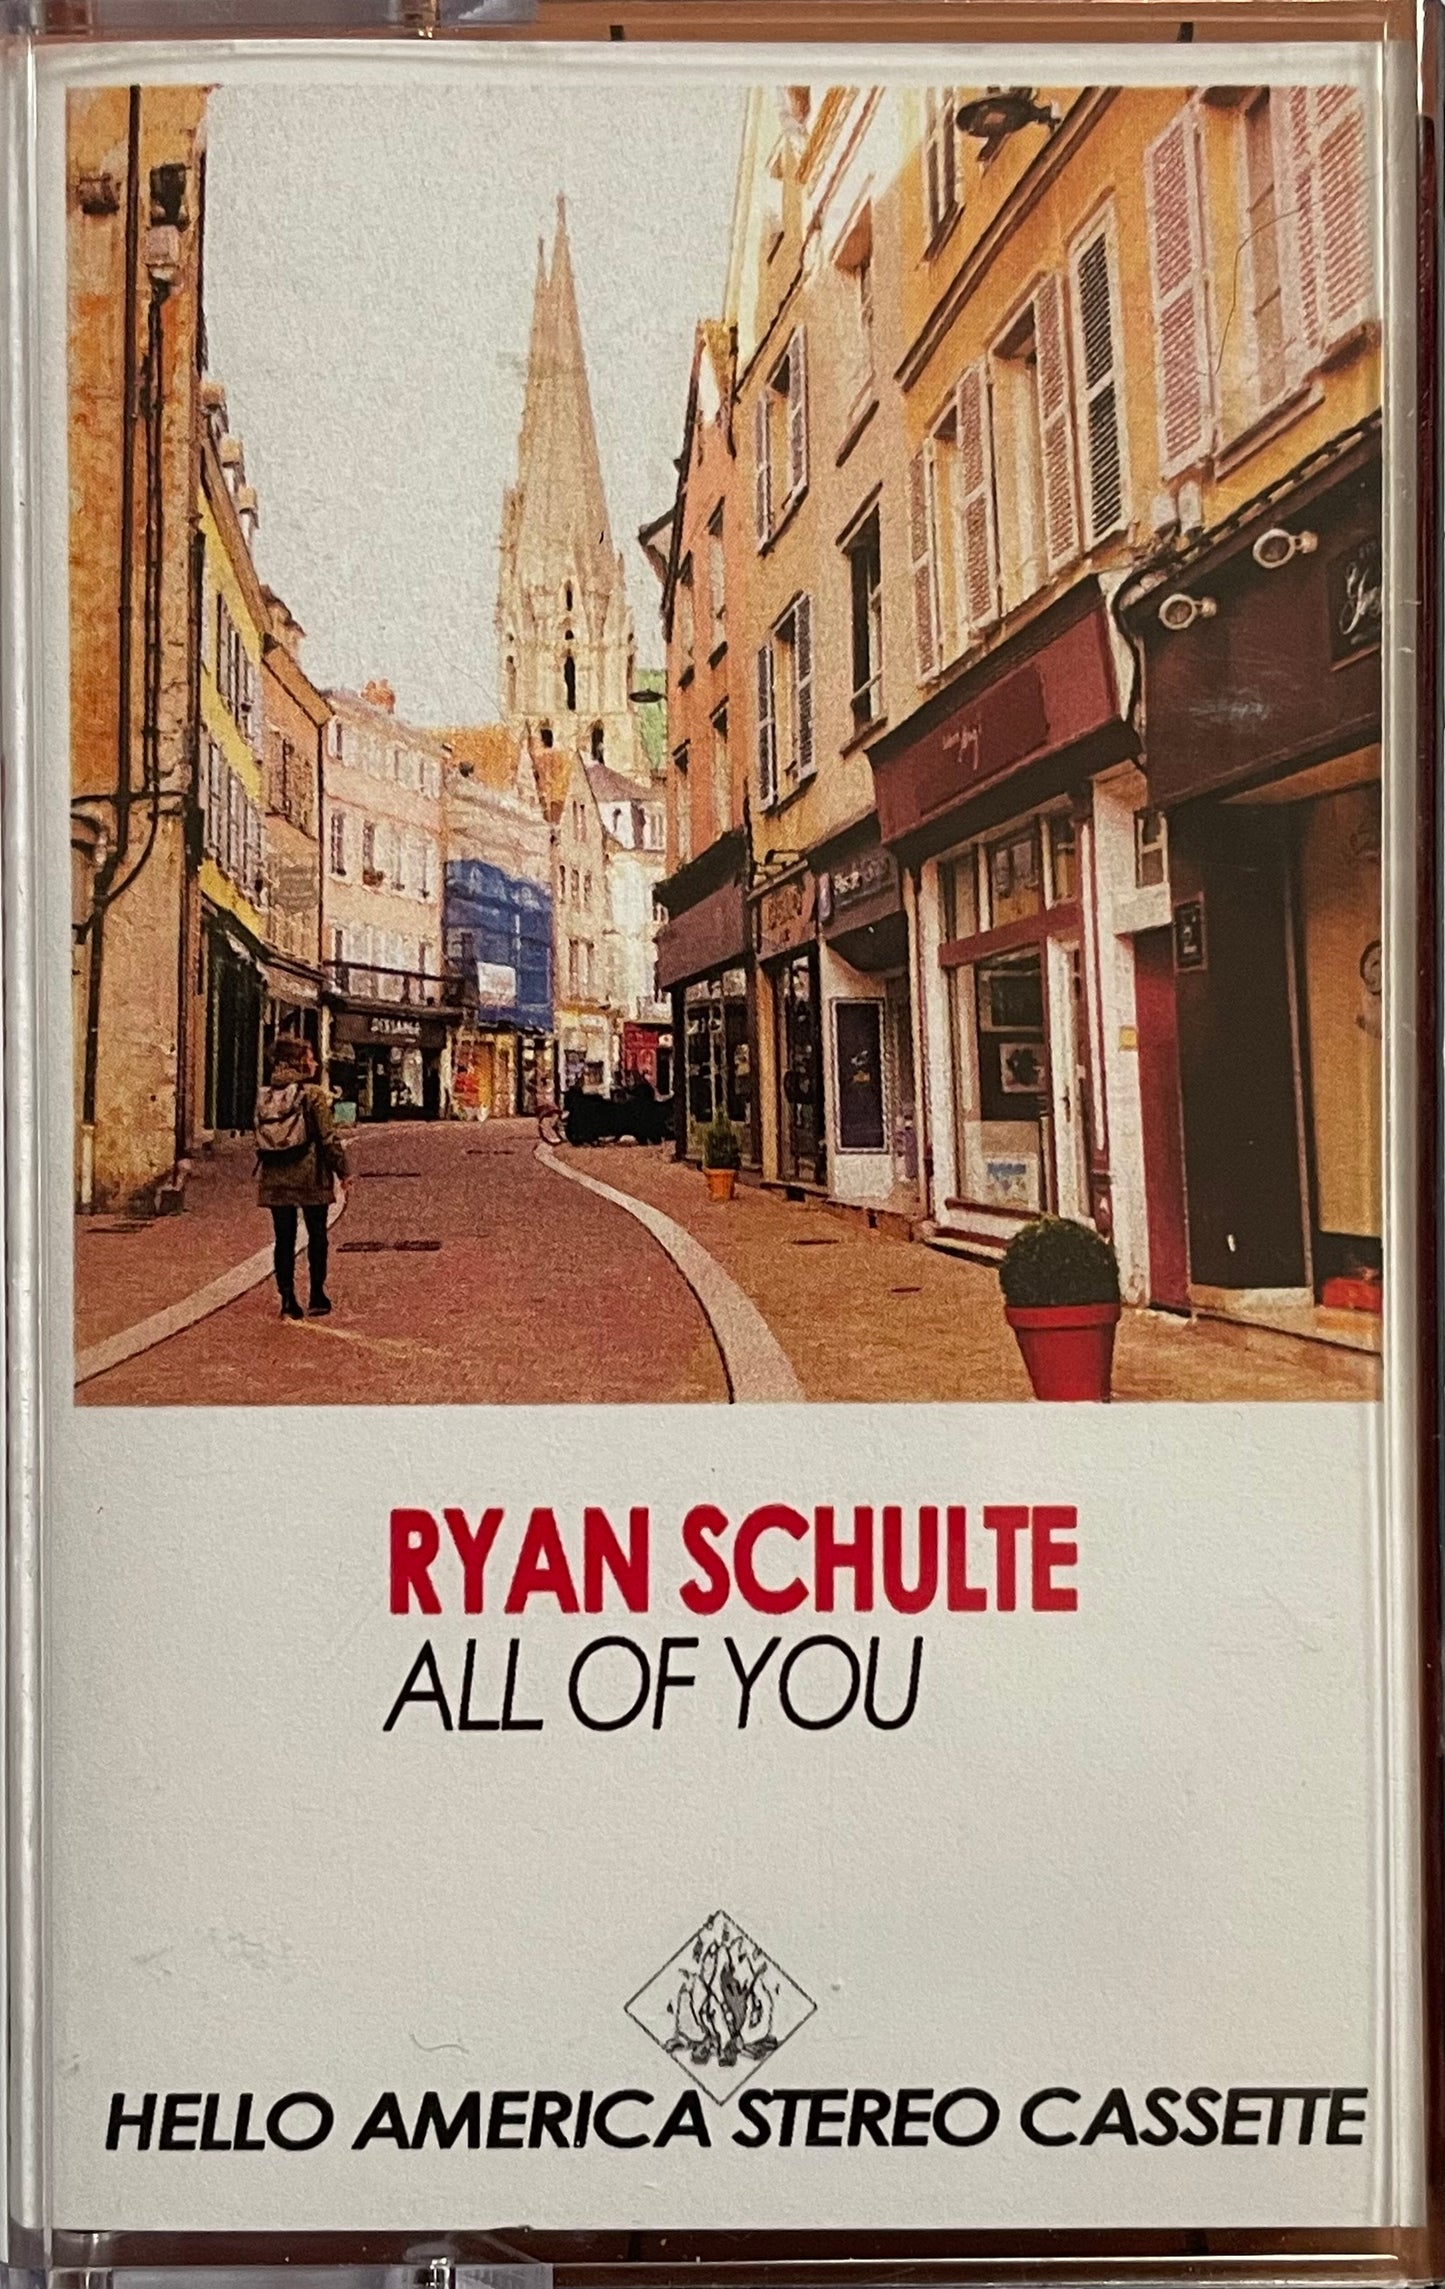 All of You, by Ryan Schulte